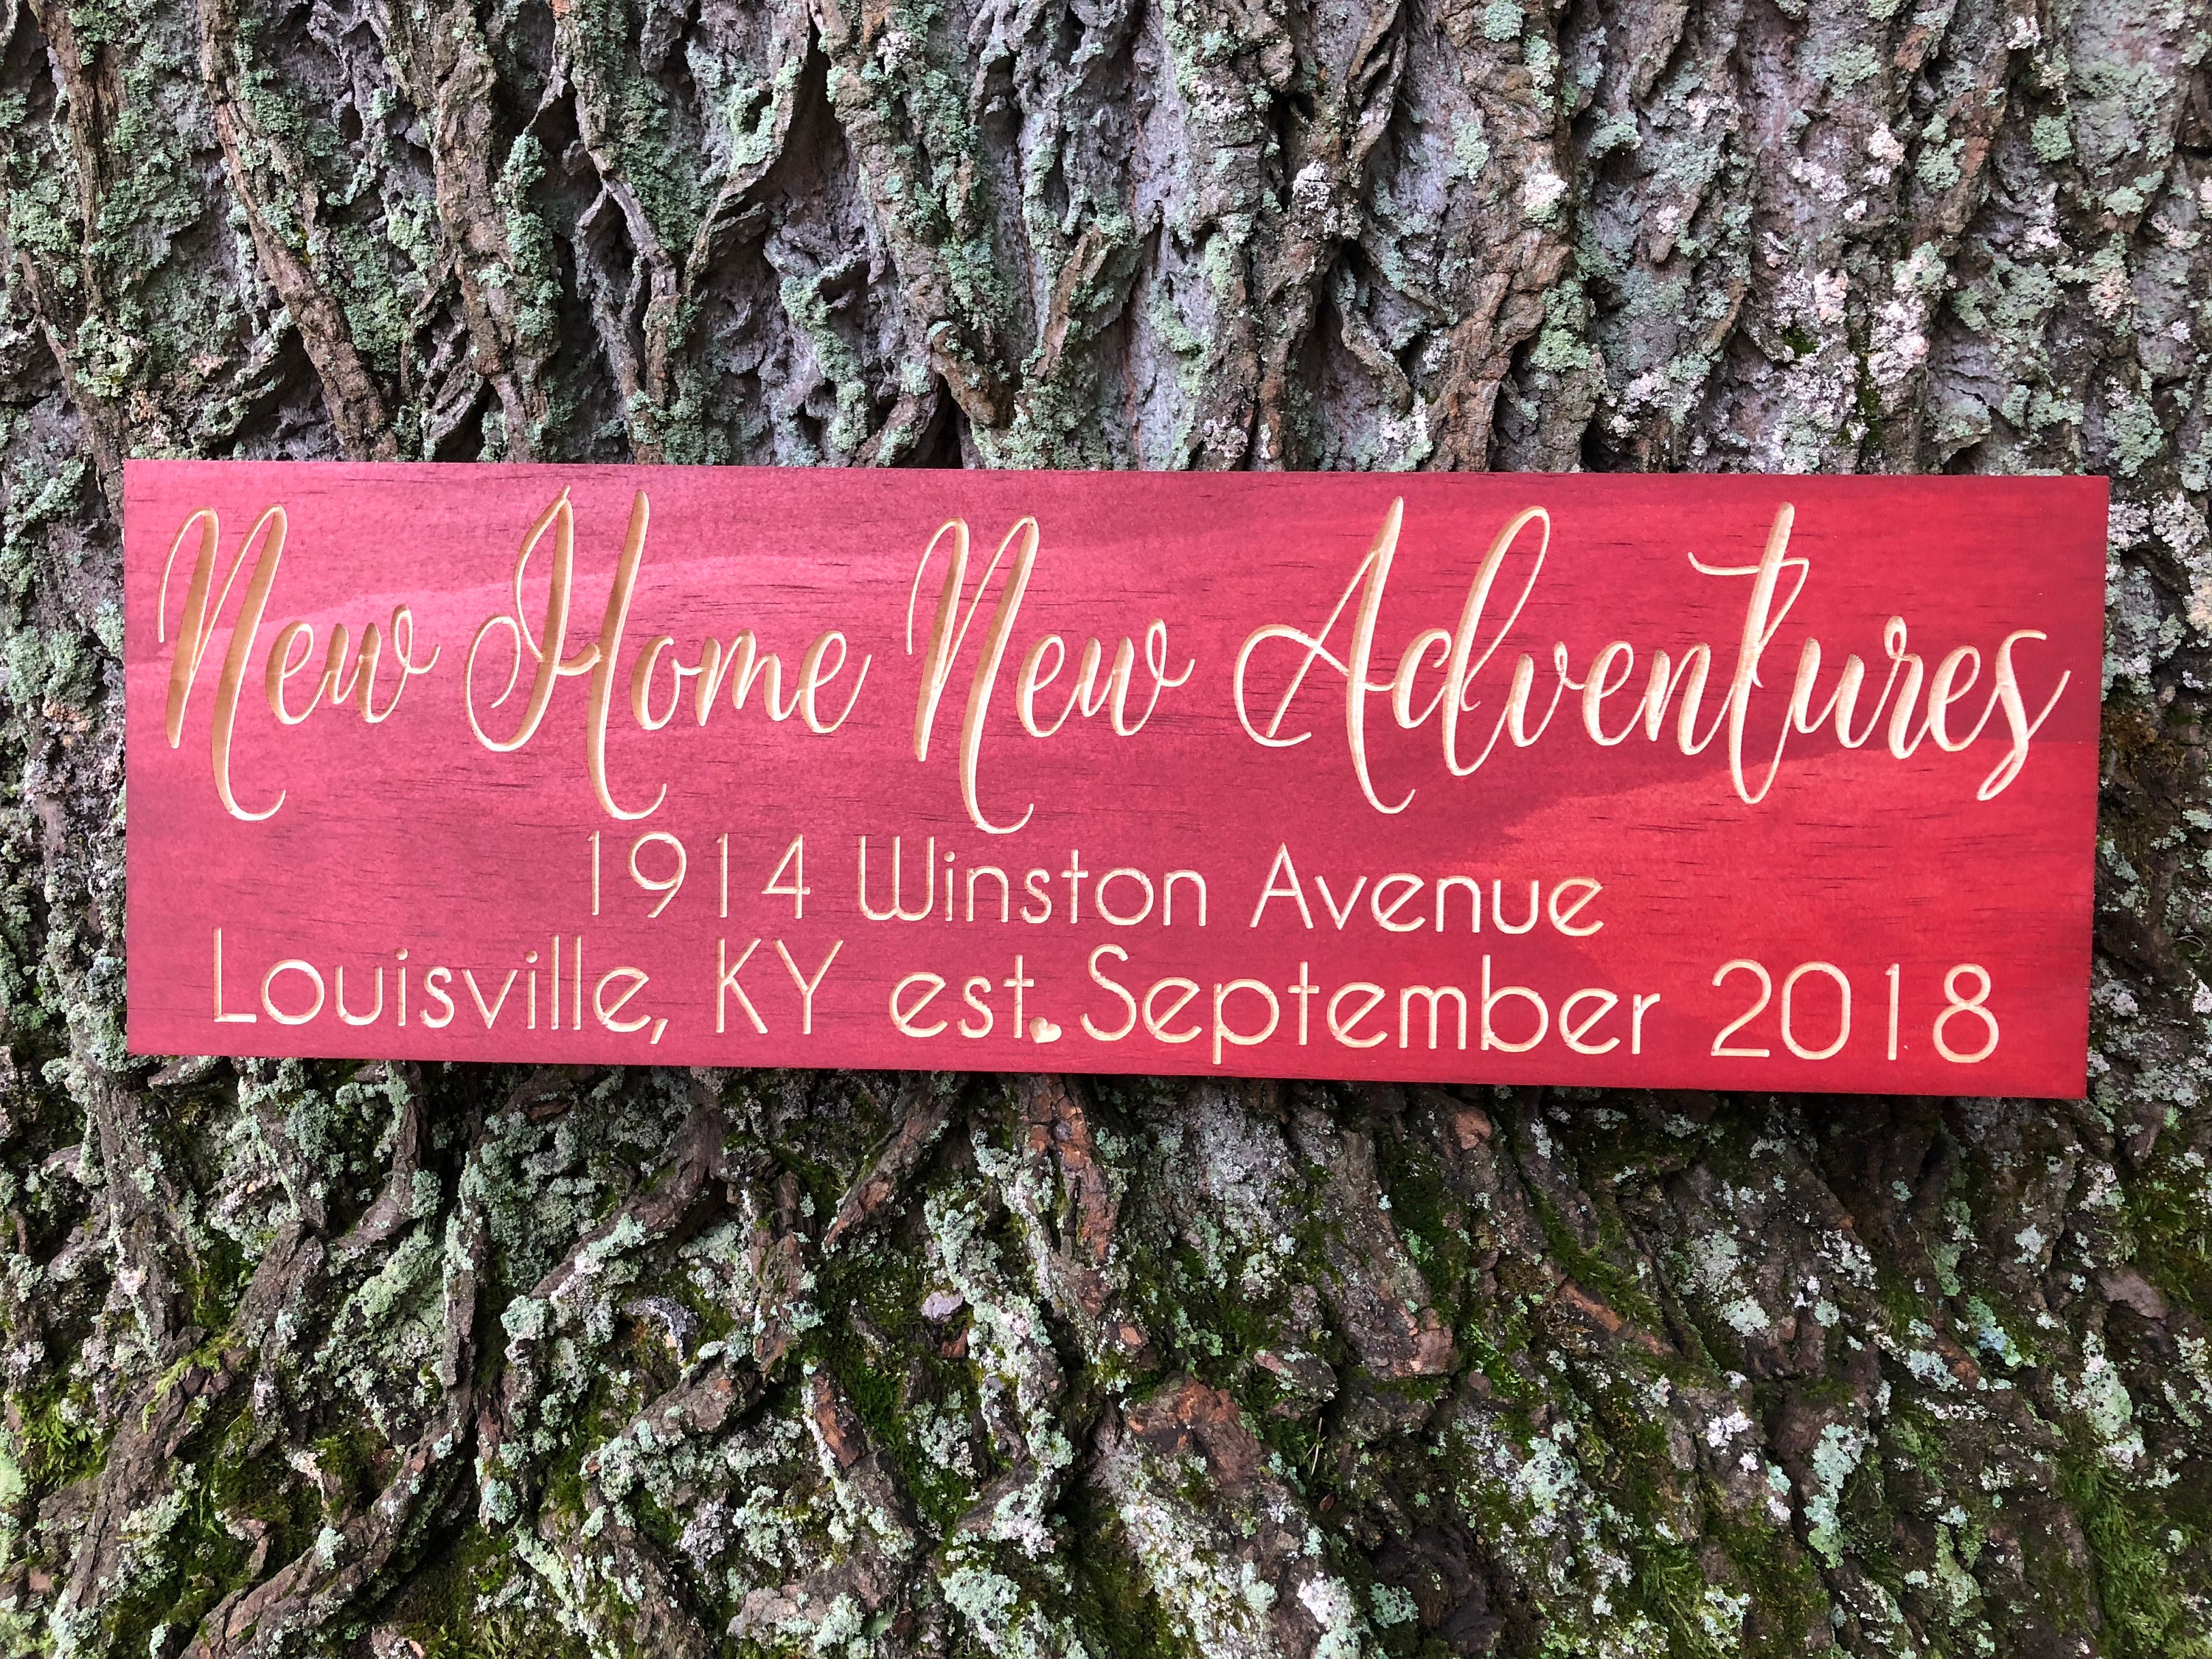 Wedding Sign, Newlywed Gift, Just Married, the Hunt is Over, Bridal Shower,  Hunting, Housewarming Gift, Wedding Gift, Anniversary Sign 